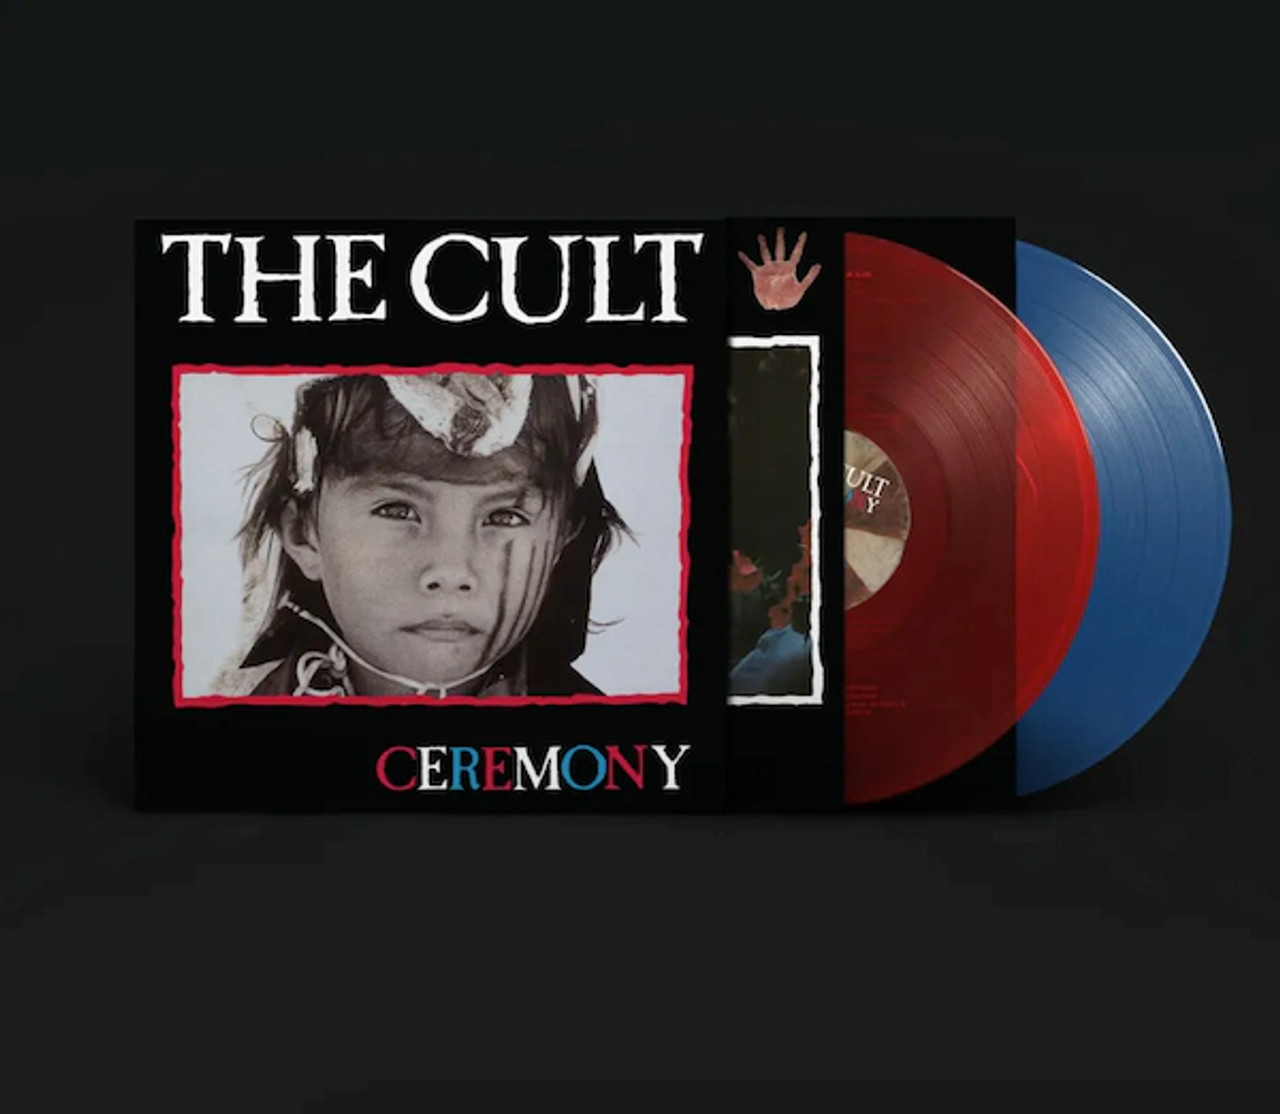 The Cult - Ceremony (2LP)